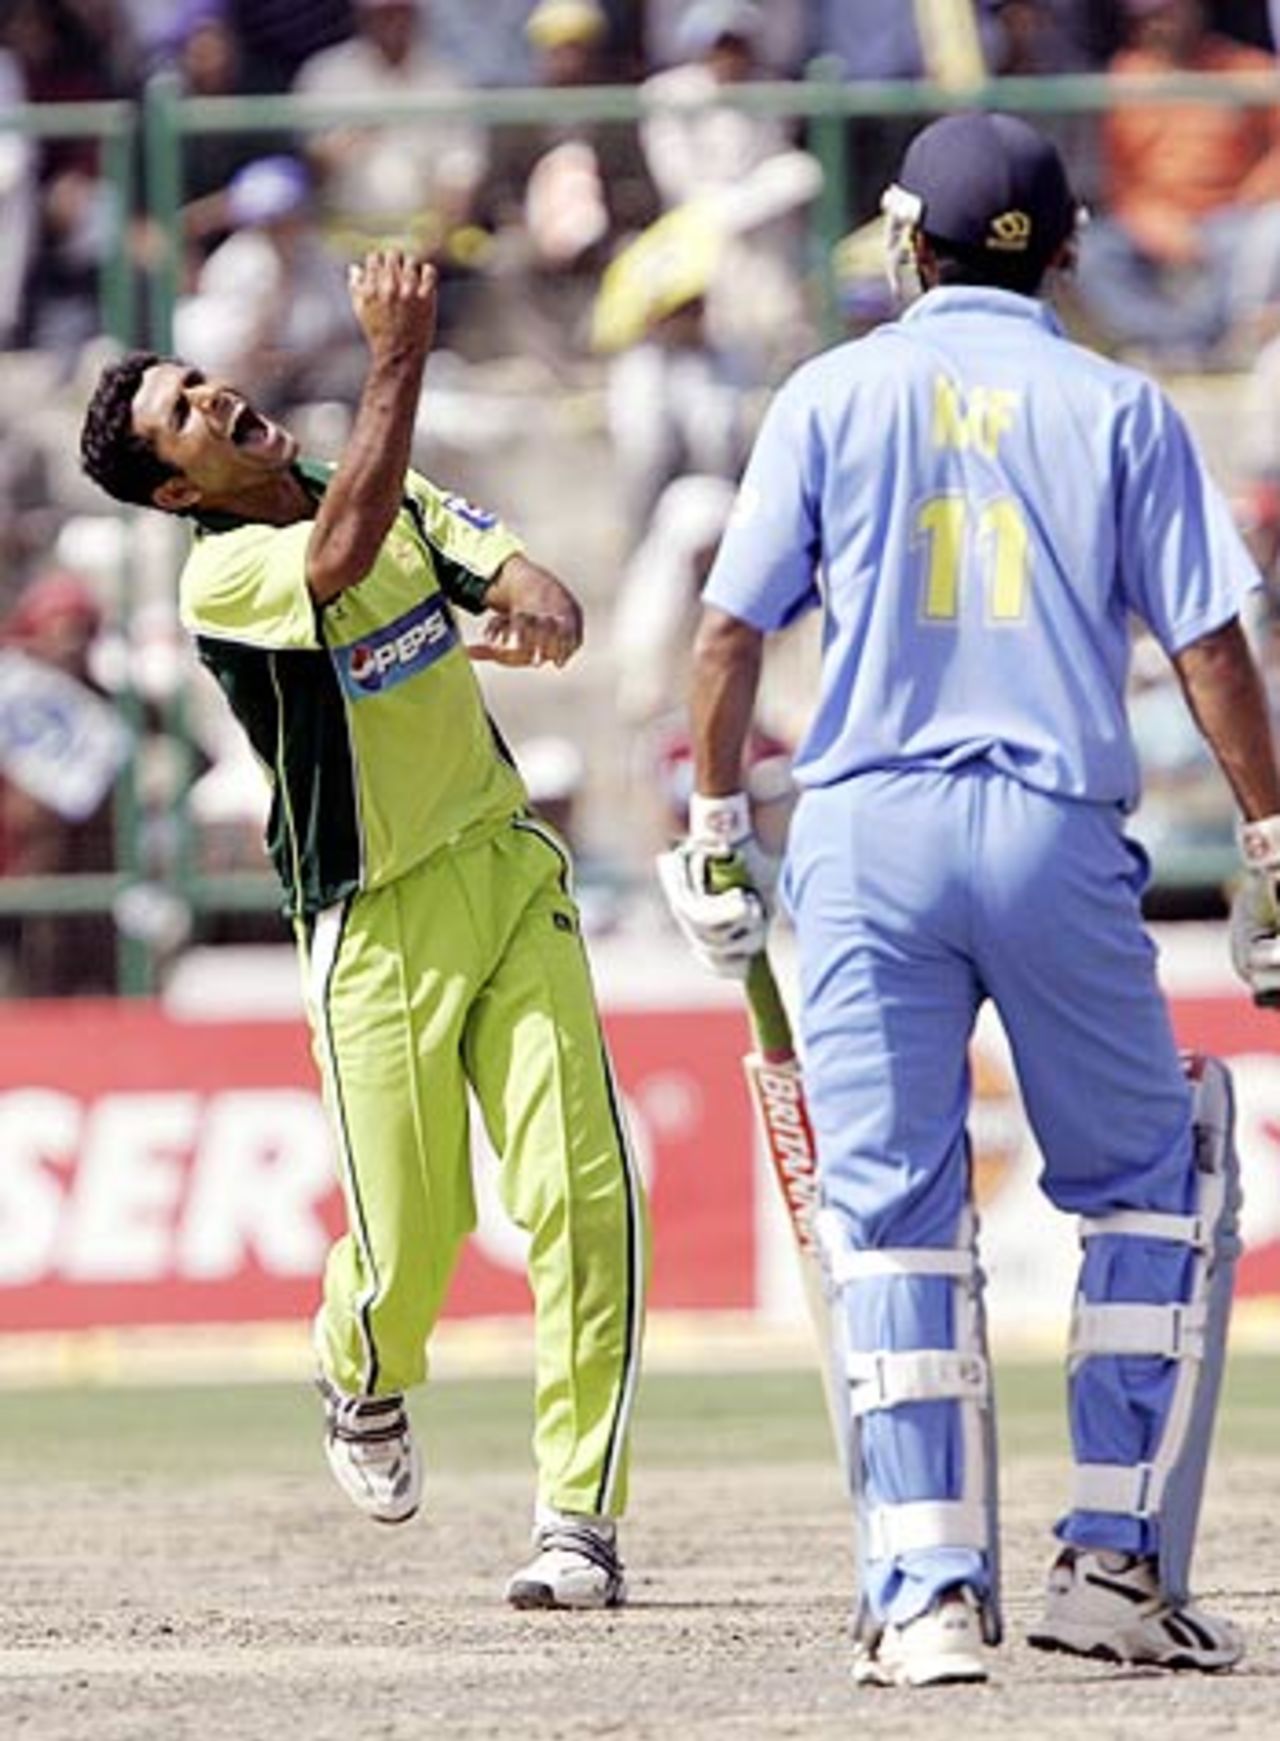 Mohammad Kaif's dismissal all but put an end to India's chances of levelling the series, India v Pakistan, 6th ODI, Delhi, April 17, 2005